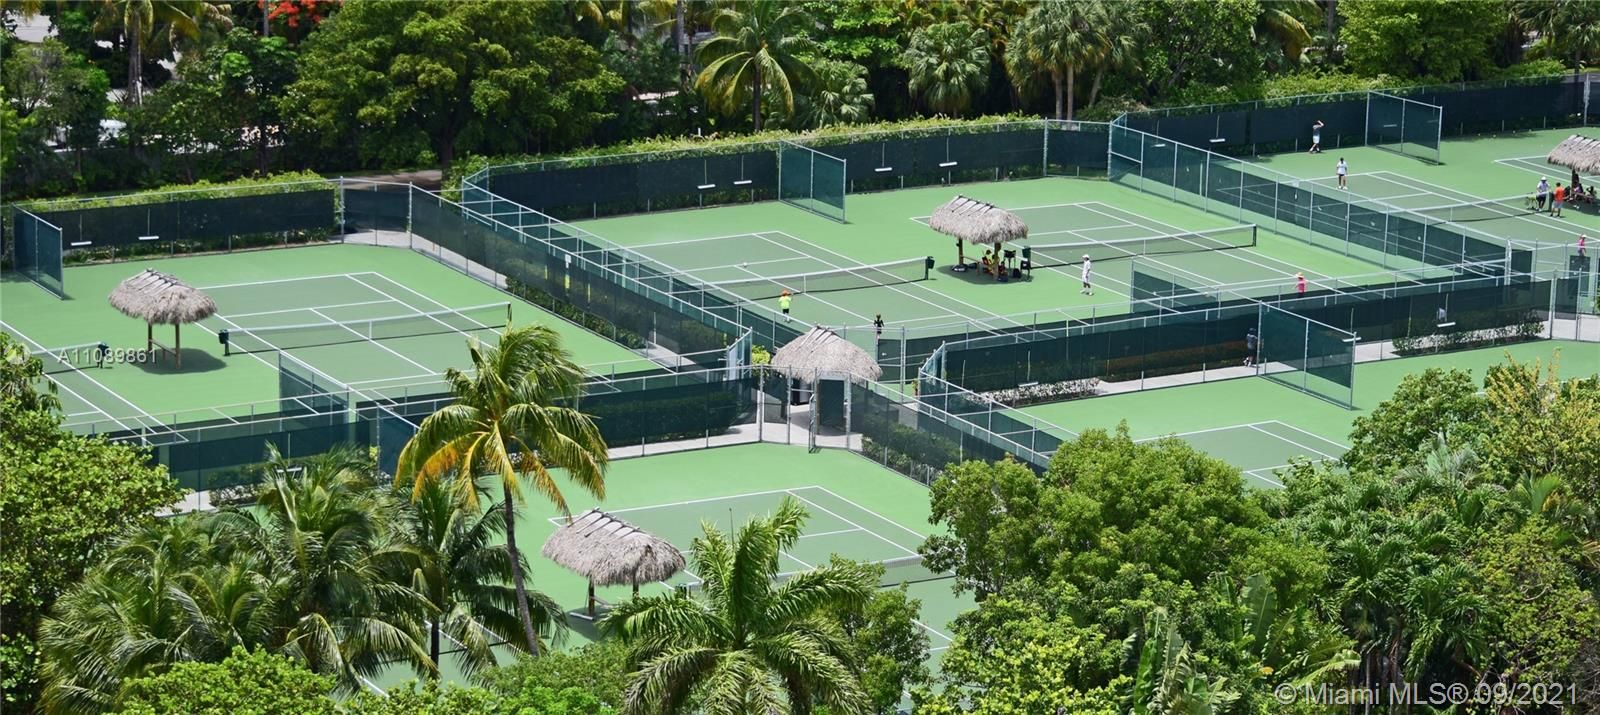 12 Tennis courts for residents.